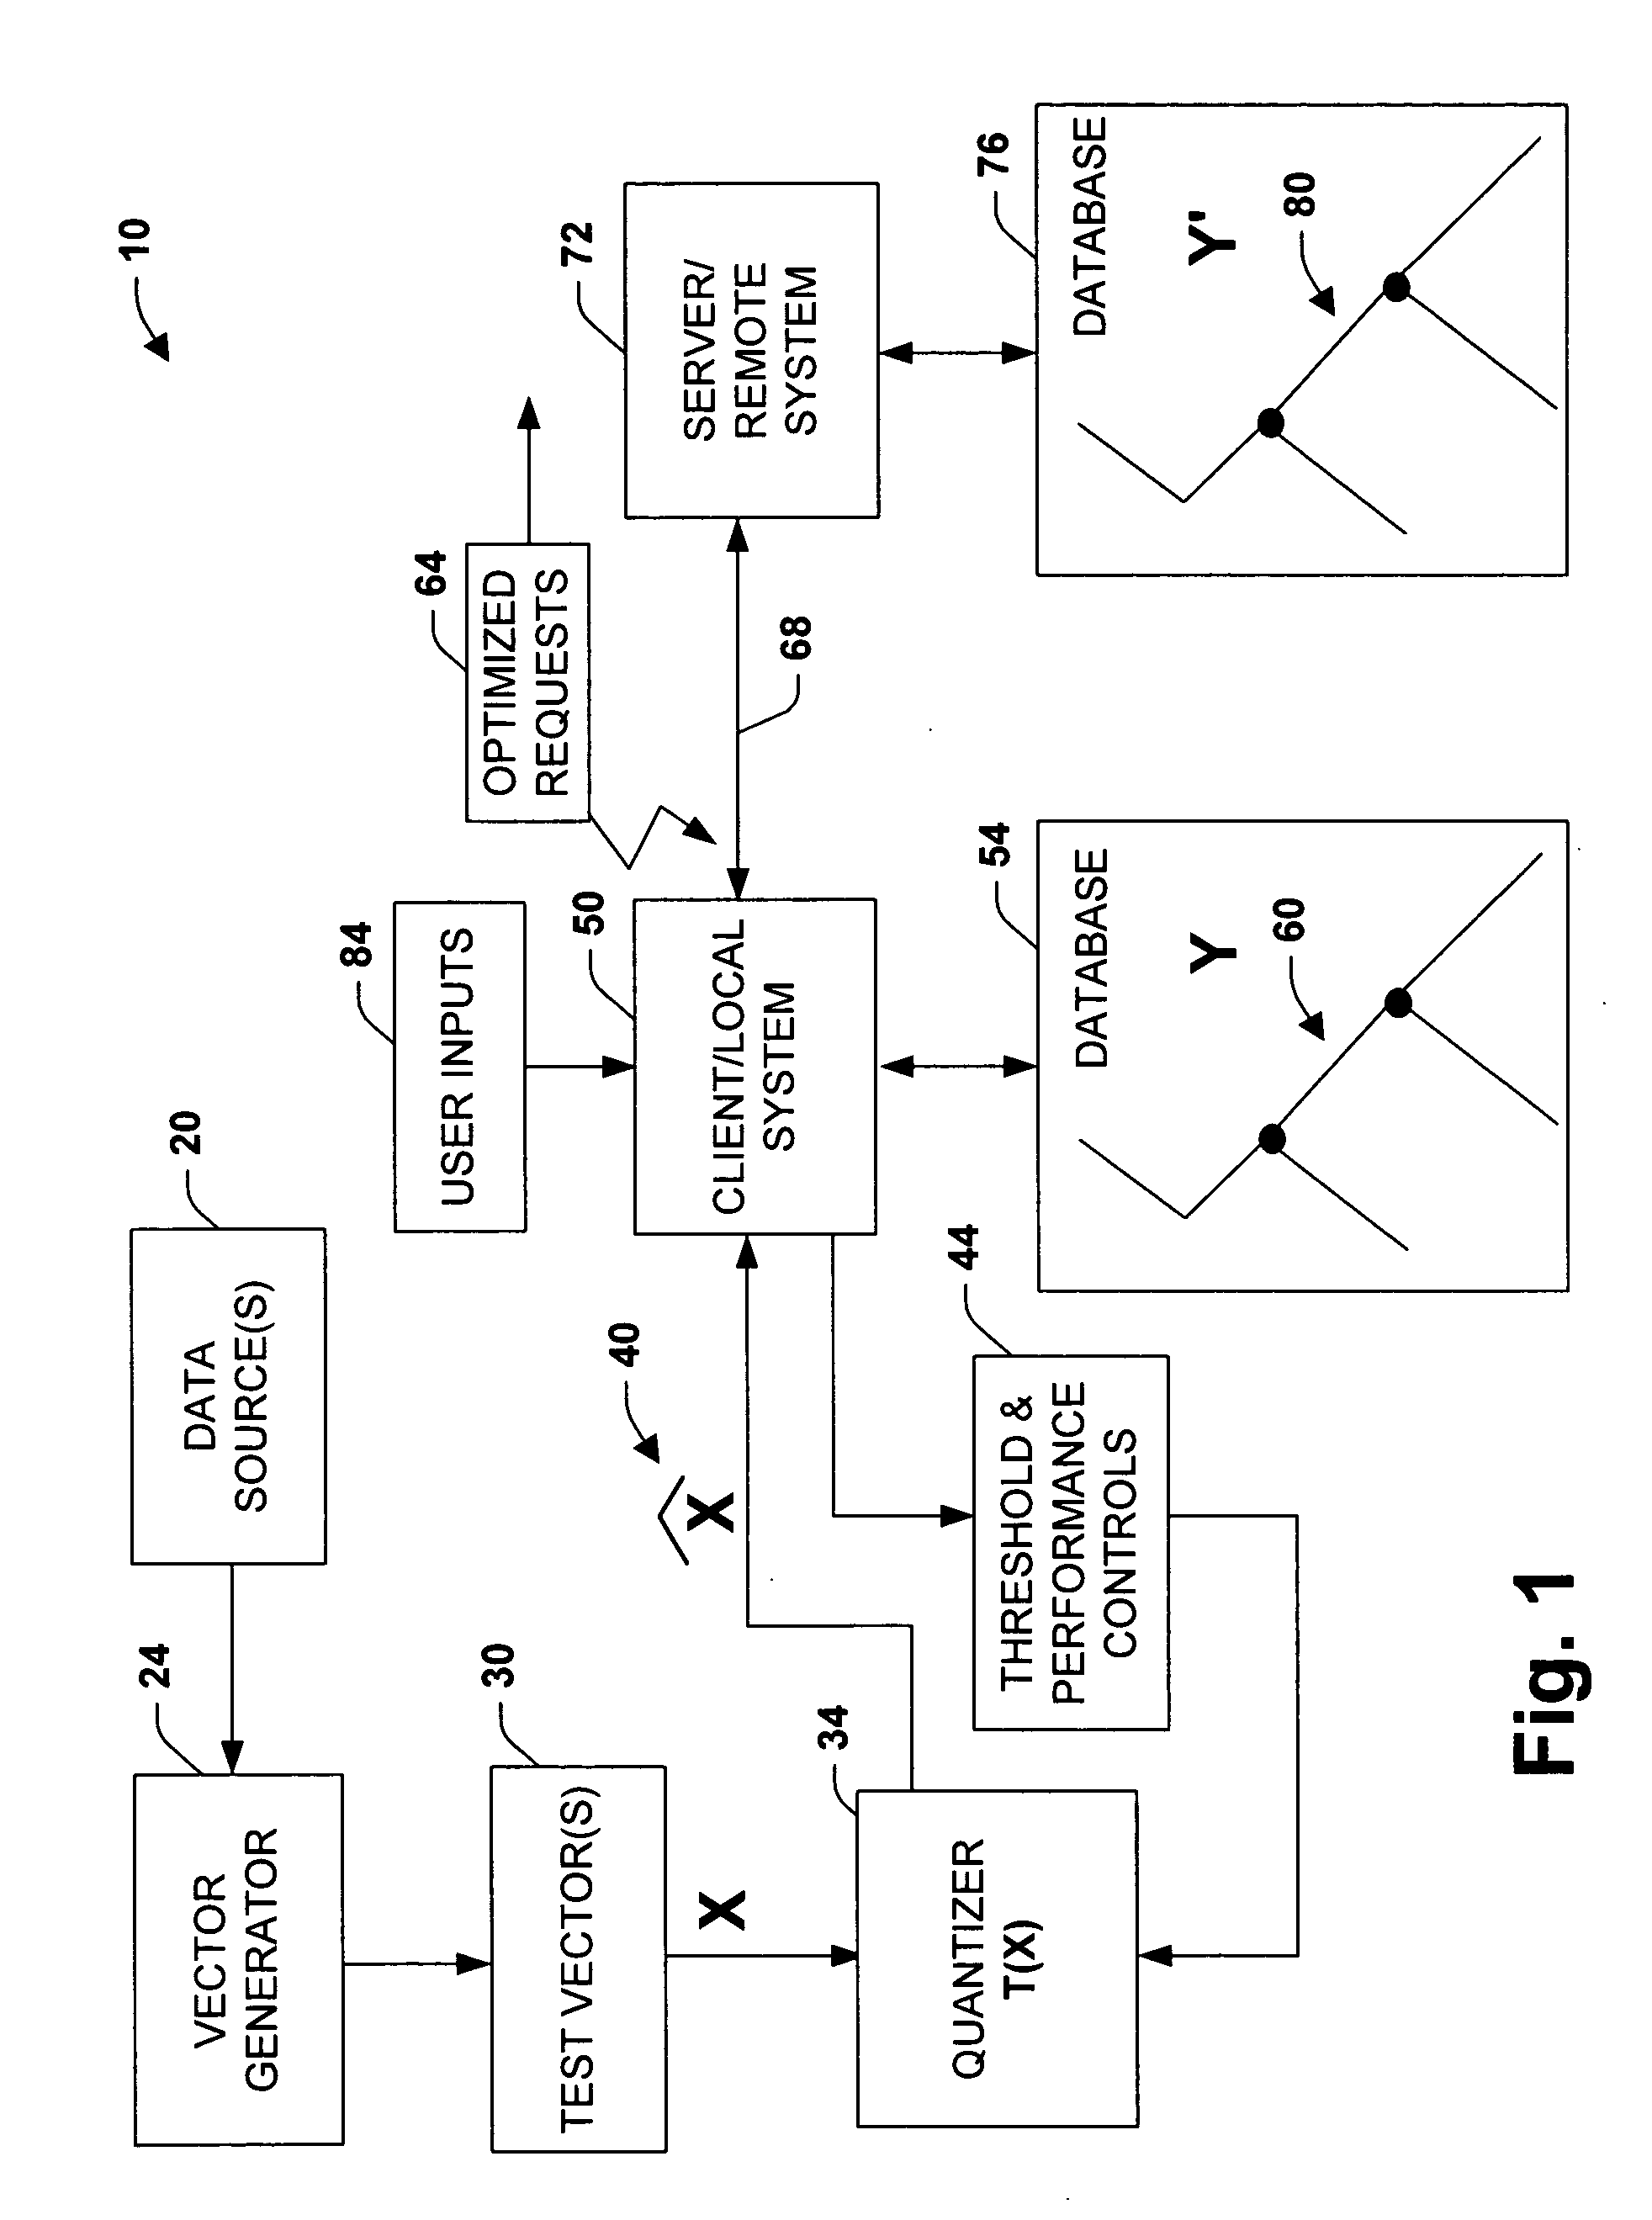 System and method providing automated margin tree analysis and processing of sampled data